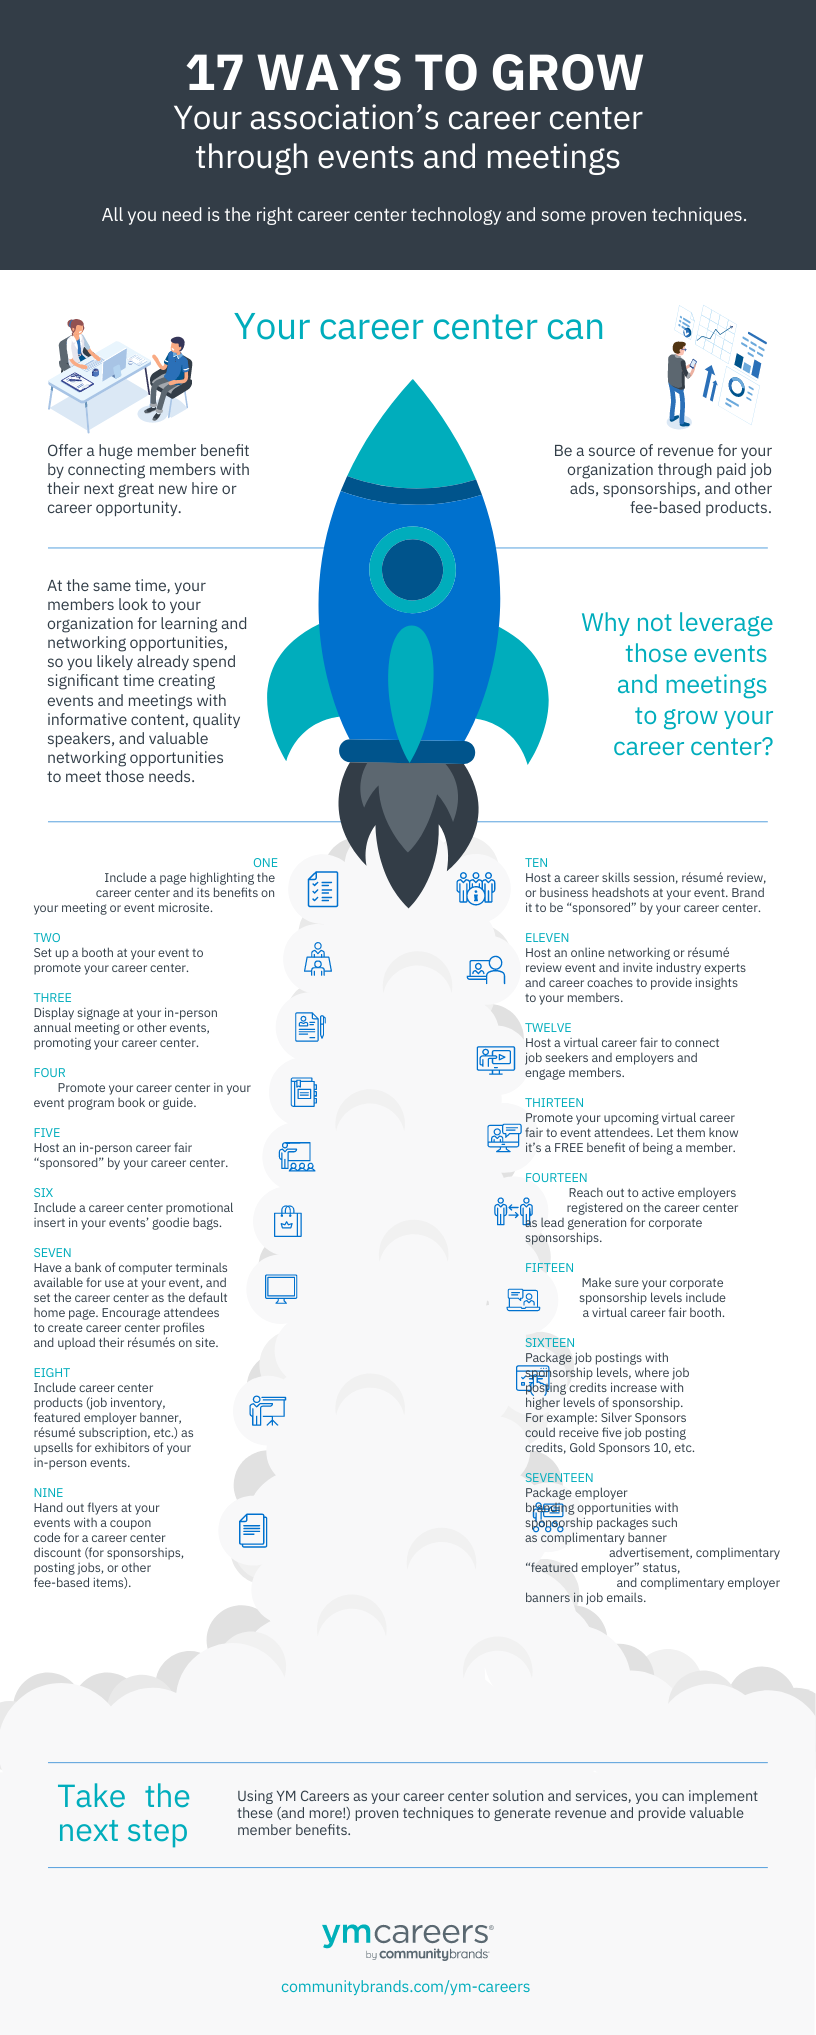 Grow Your Career Center through Events and Meetings